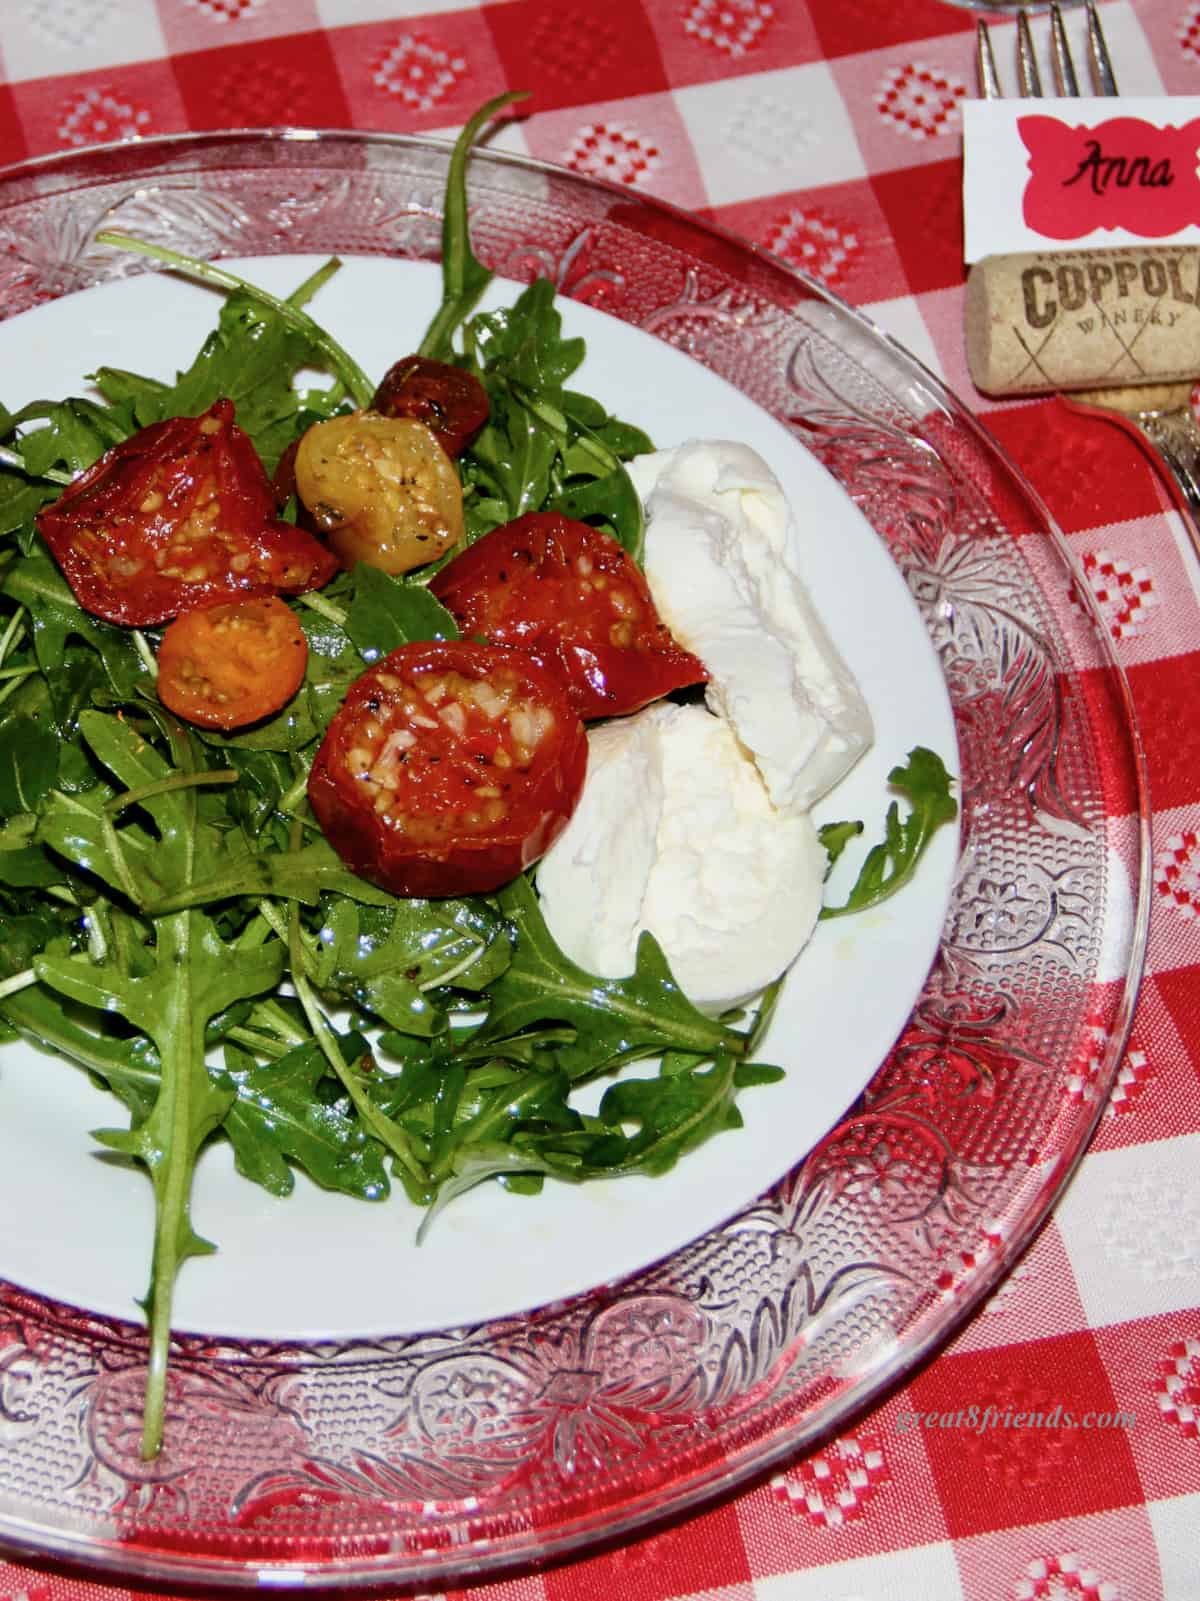 An arugula and fennel salad with roasted tomatoes and mozzarella on a red and white tablecloth.